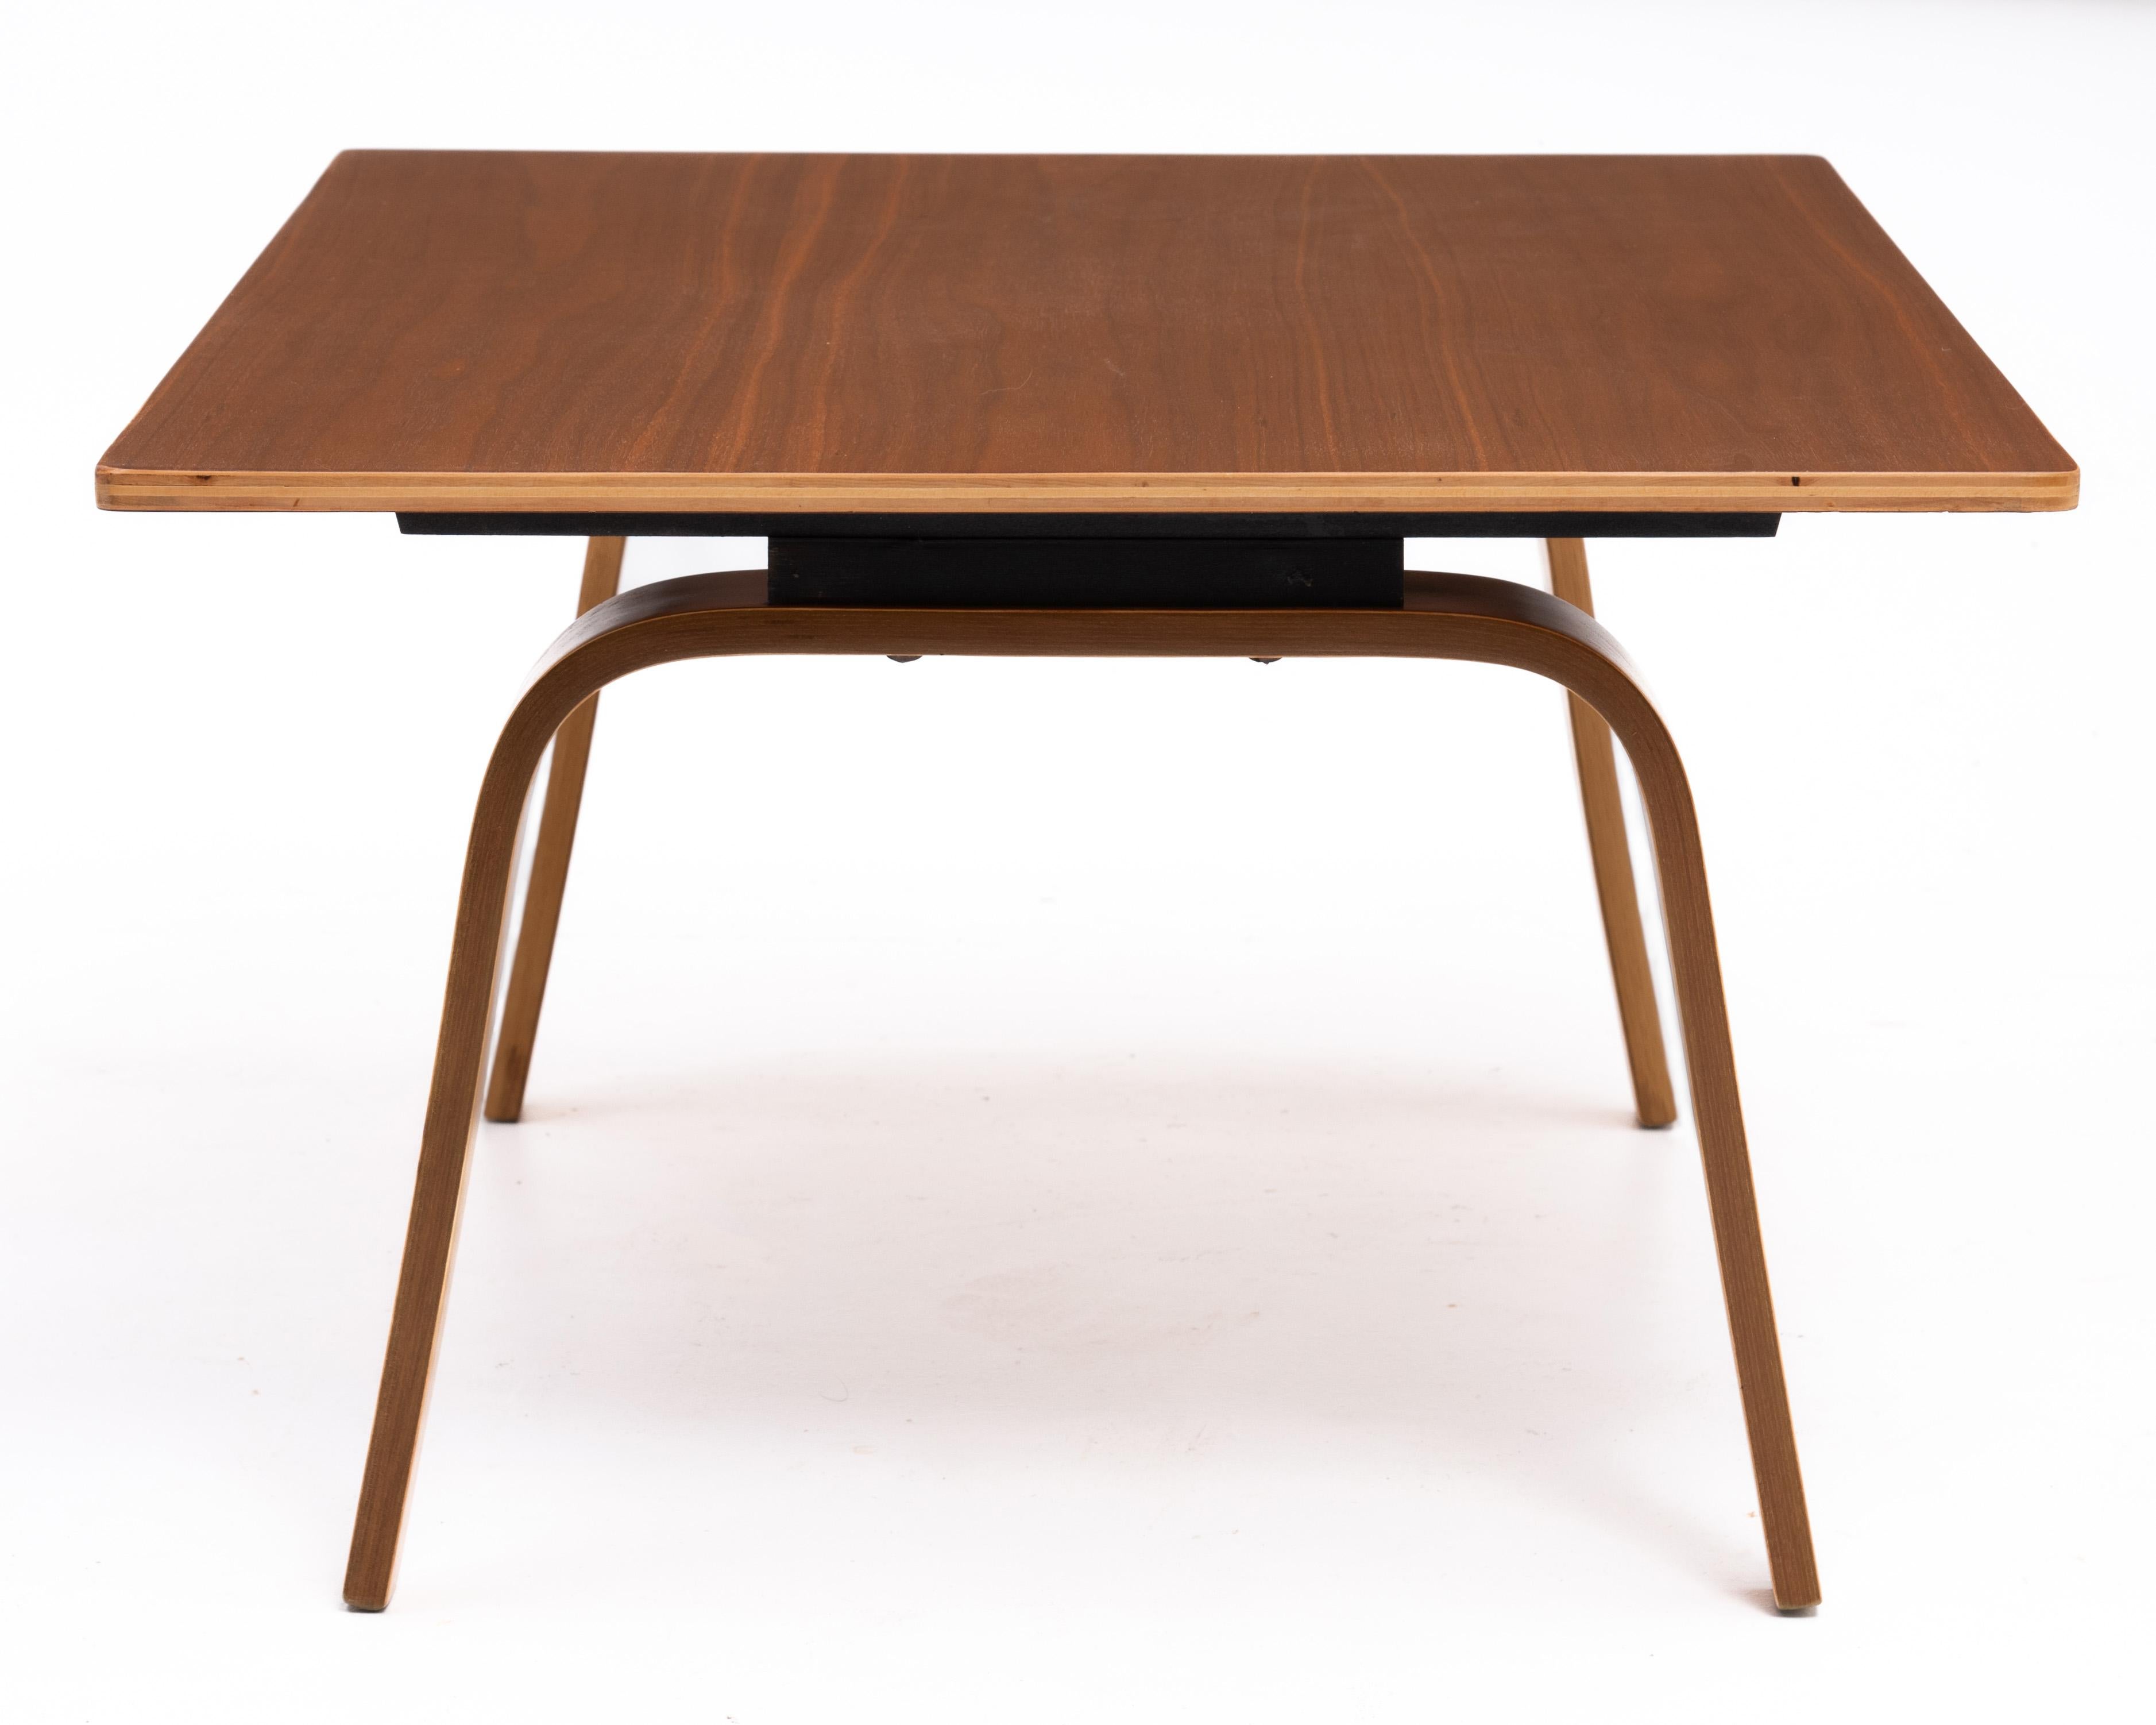 American Charles Ray Eames Evans Plywood Company CTW1 OTW Oblong Table Wood Walnut Birch For Sale